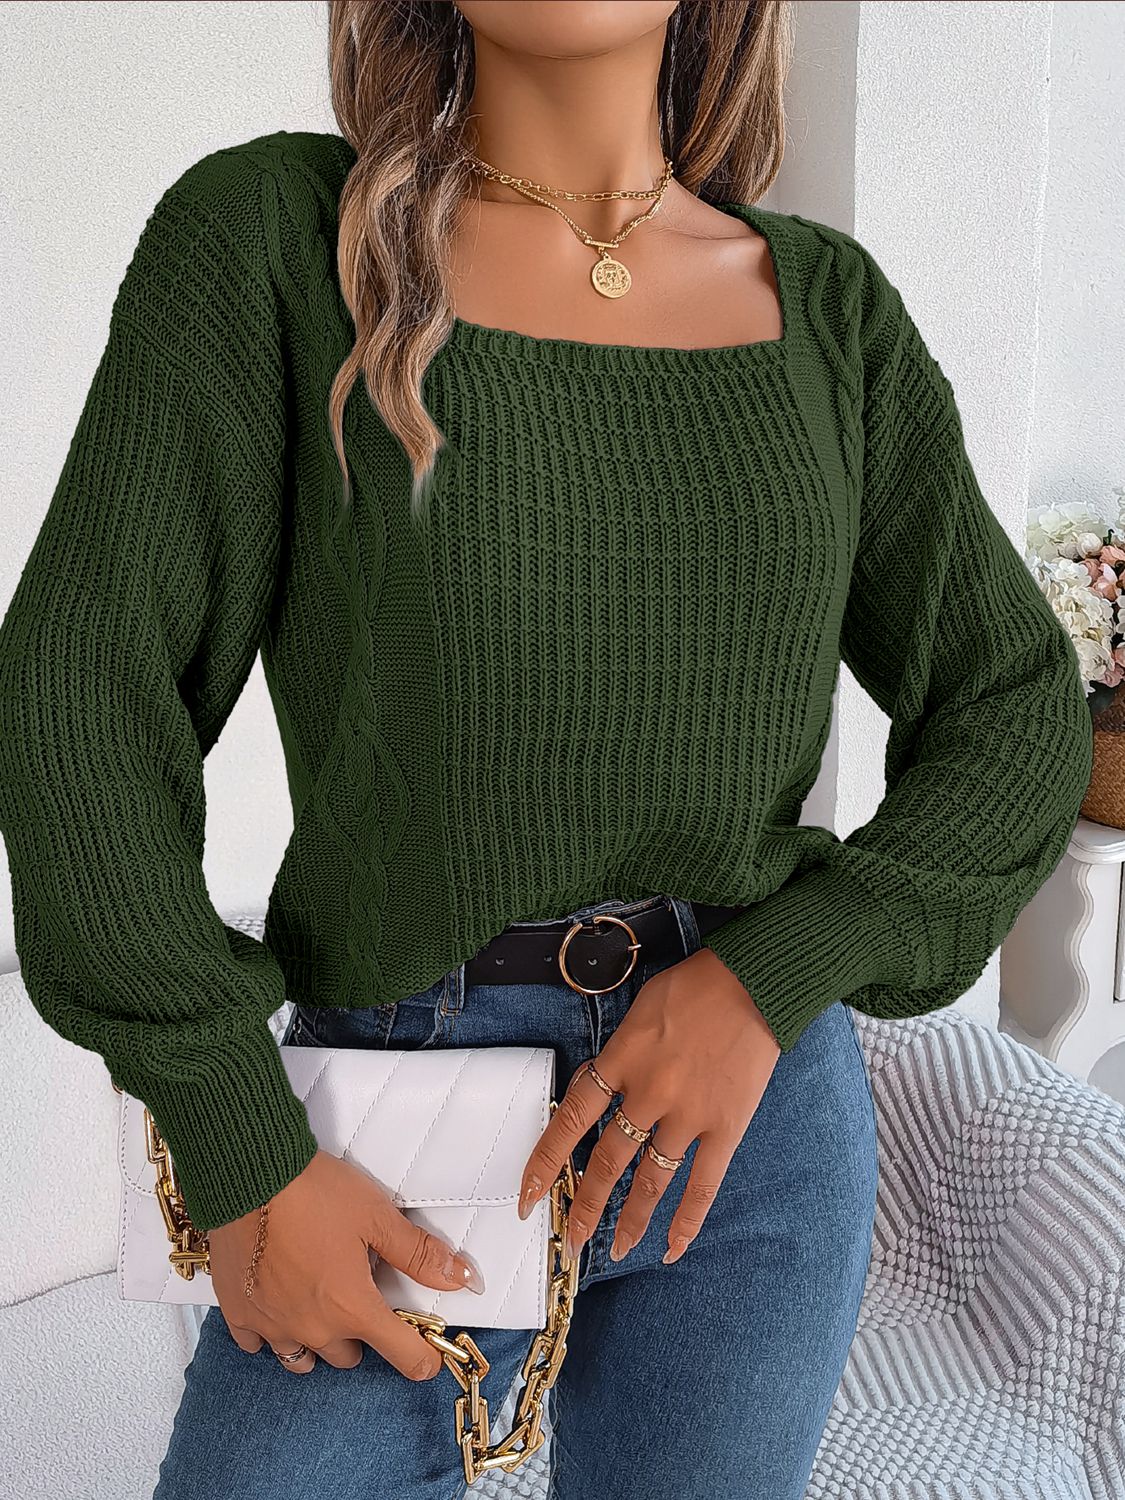 Chic Babe' Square Neck Mixed Knit Sweater 🦋